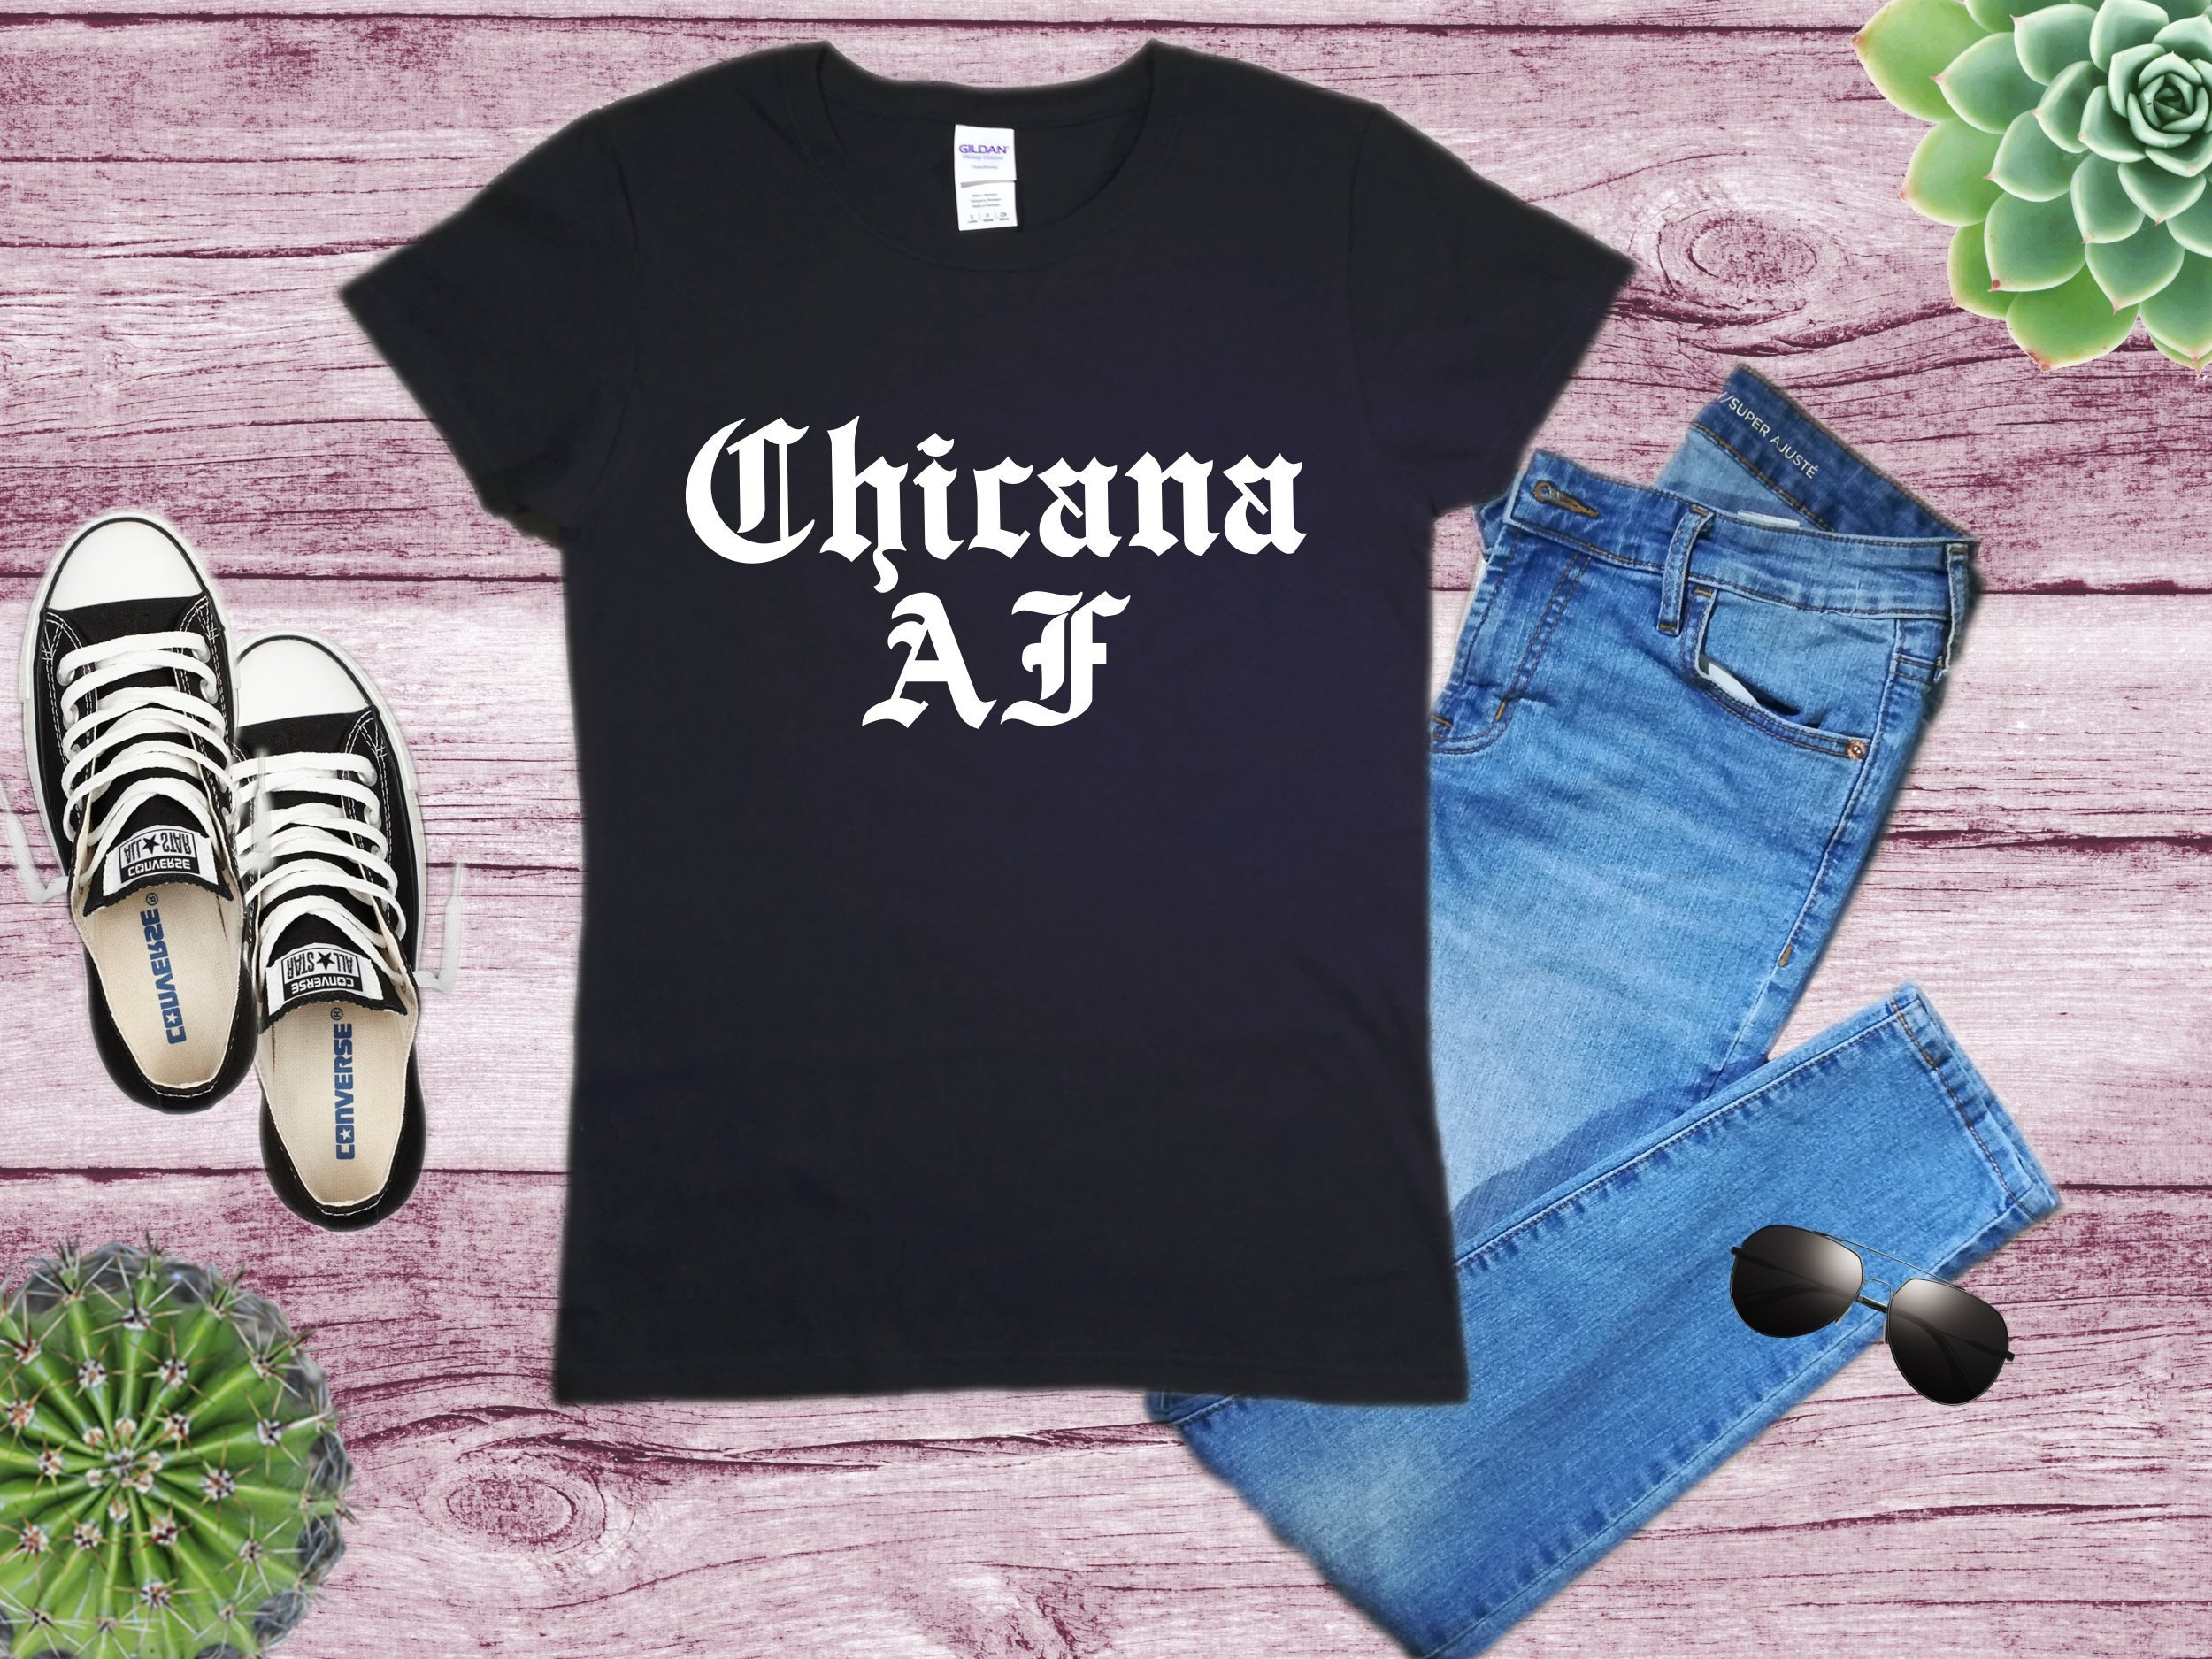 Chicana Af Mexican American Pride Shirt - Spanish Ladies Sizes T-Shirt Playera Latinx Orgullo Mexicano Different Colors Available